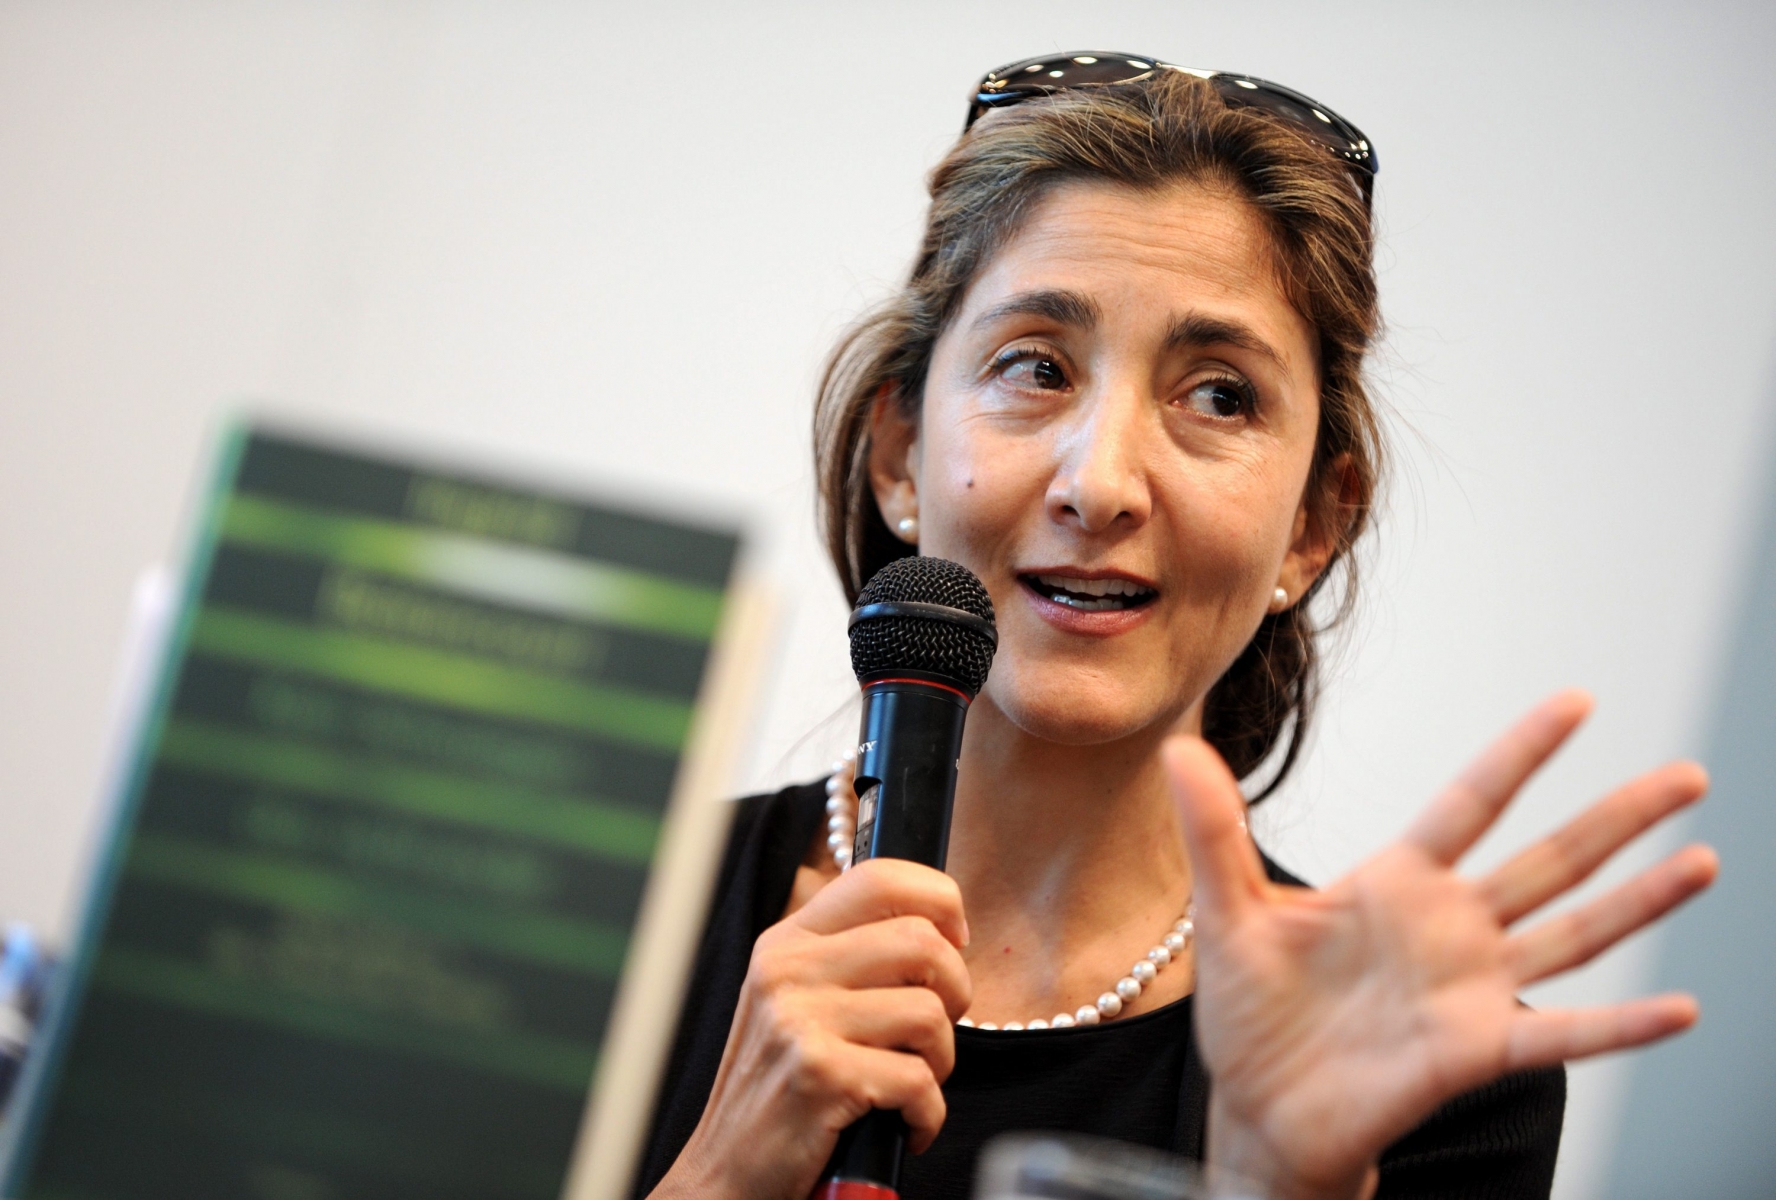 epa02383435 Former Colombian presidential candidate and former hostage Ingrid Betancourt talks at the booth of the German newspaper Frankfurt Allgemeine Zeitung (FAZ) at the Book Fair in Frankfurt, Germany, 08 October 2010. The fair for printed and digital books takes place from 06 October until 10 October and features more than 7,000 exhibitors from 113 countries.  EPA/UWE ZUCCHIIngrid Betancourt. DEUTSCHLAND FRANKFURT BUCHMESSE 2010